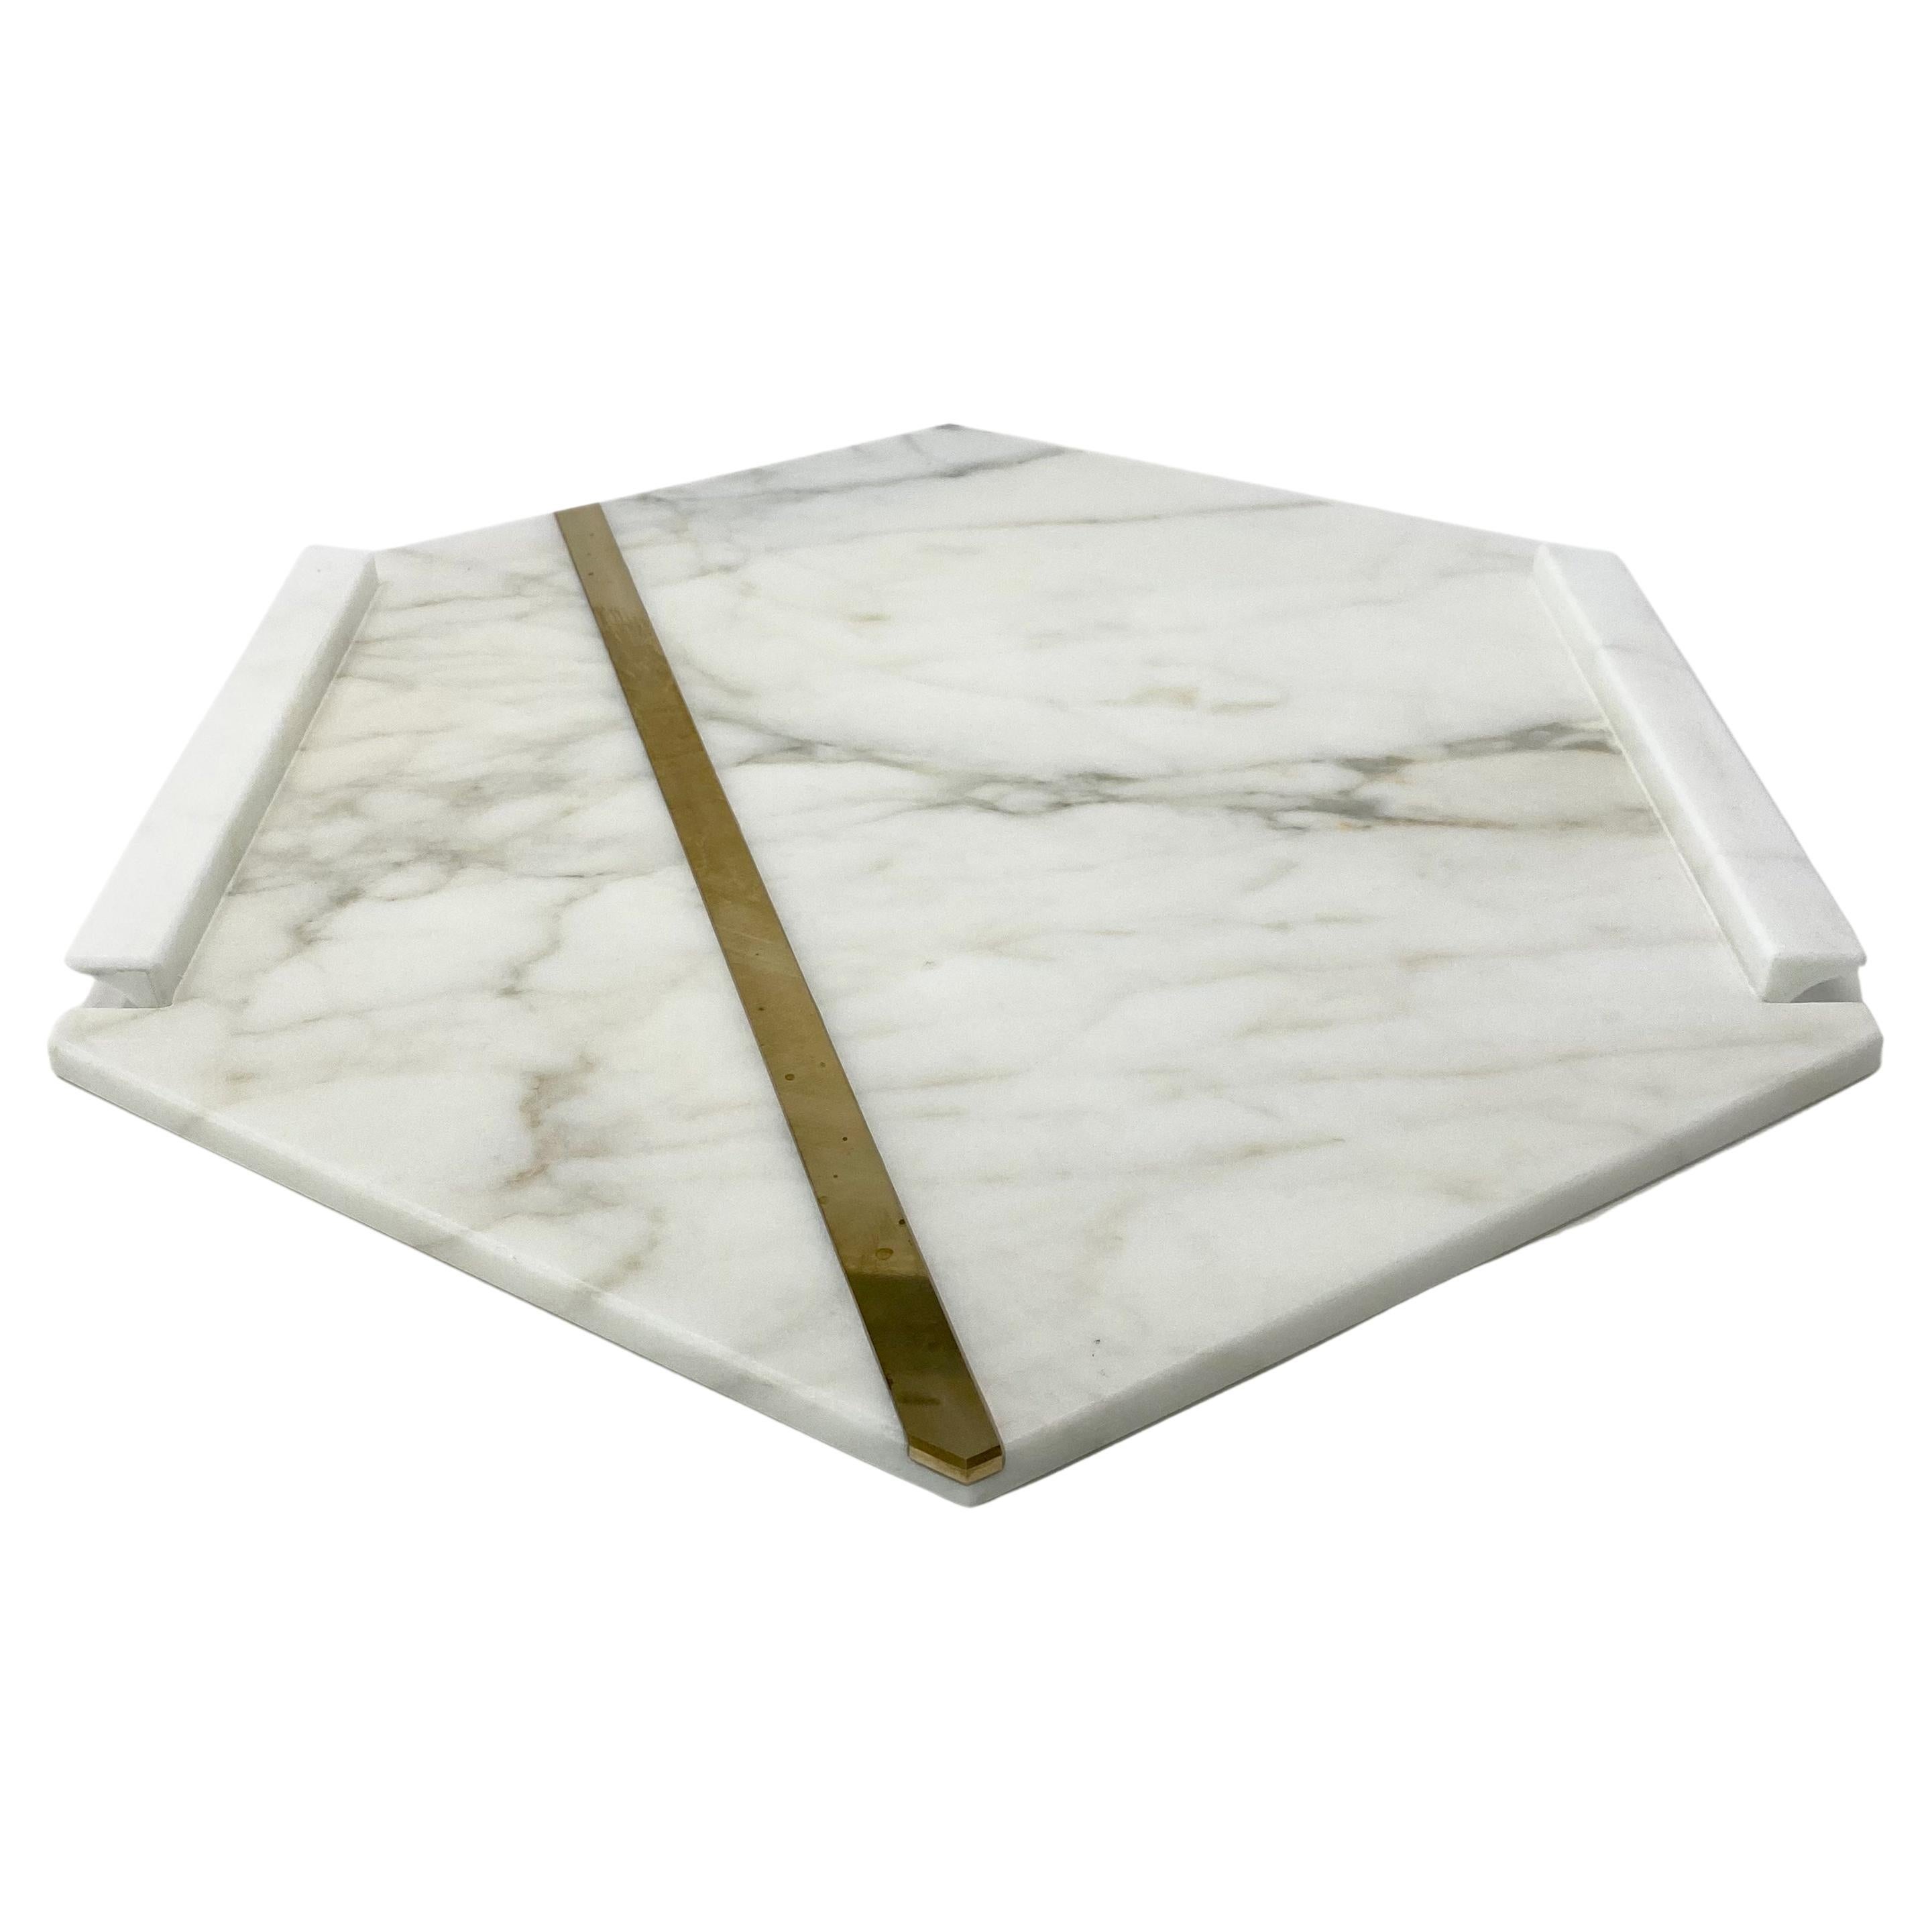 The Brass tray, entirely made of marble, is an exclusive tray in Calacatta Oro embellished with a brass tab that runs along the object from one end to the other, giving it a further touch of refined style.

The Brass tray is part of the new